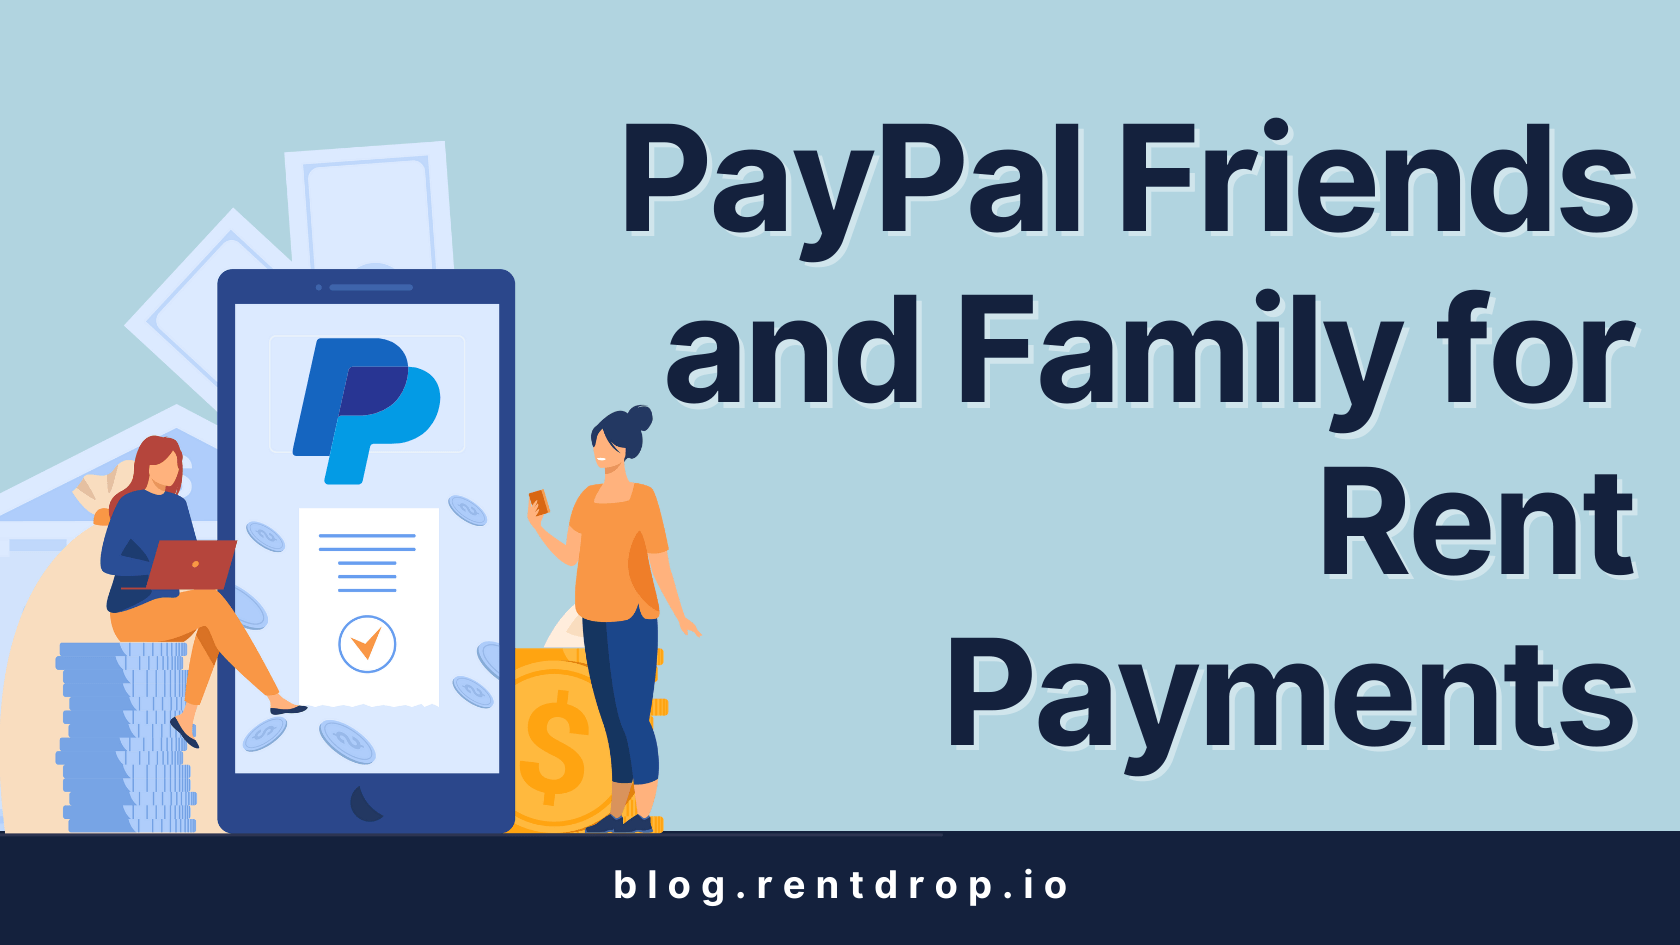 paypal friends and family for rent payments rentdrop hero image